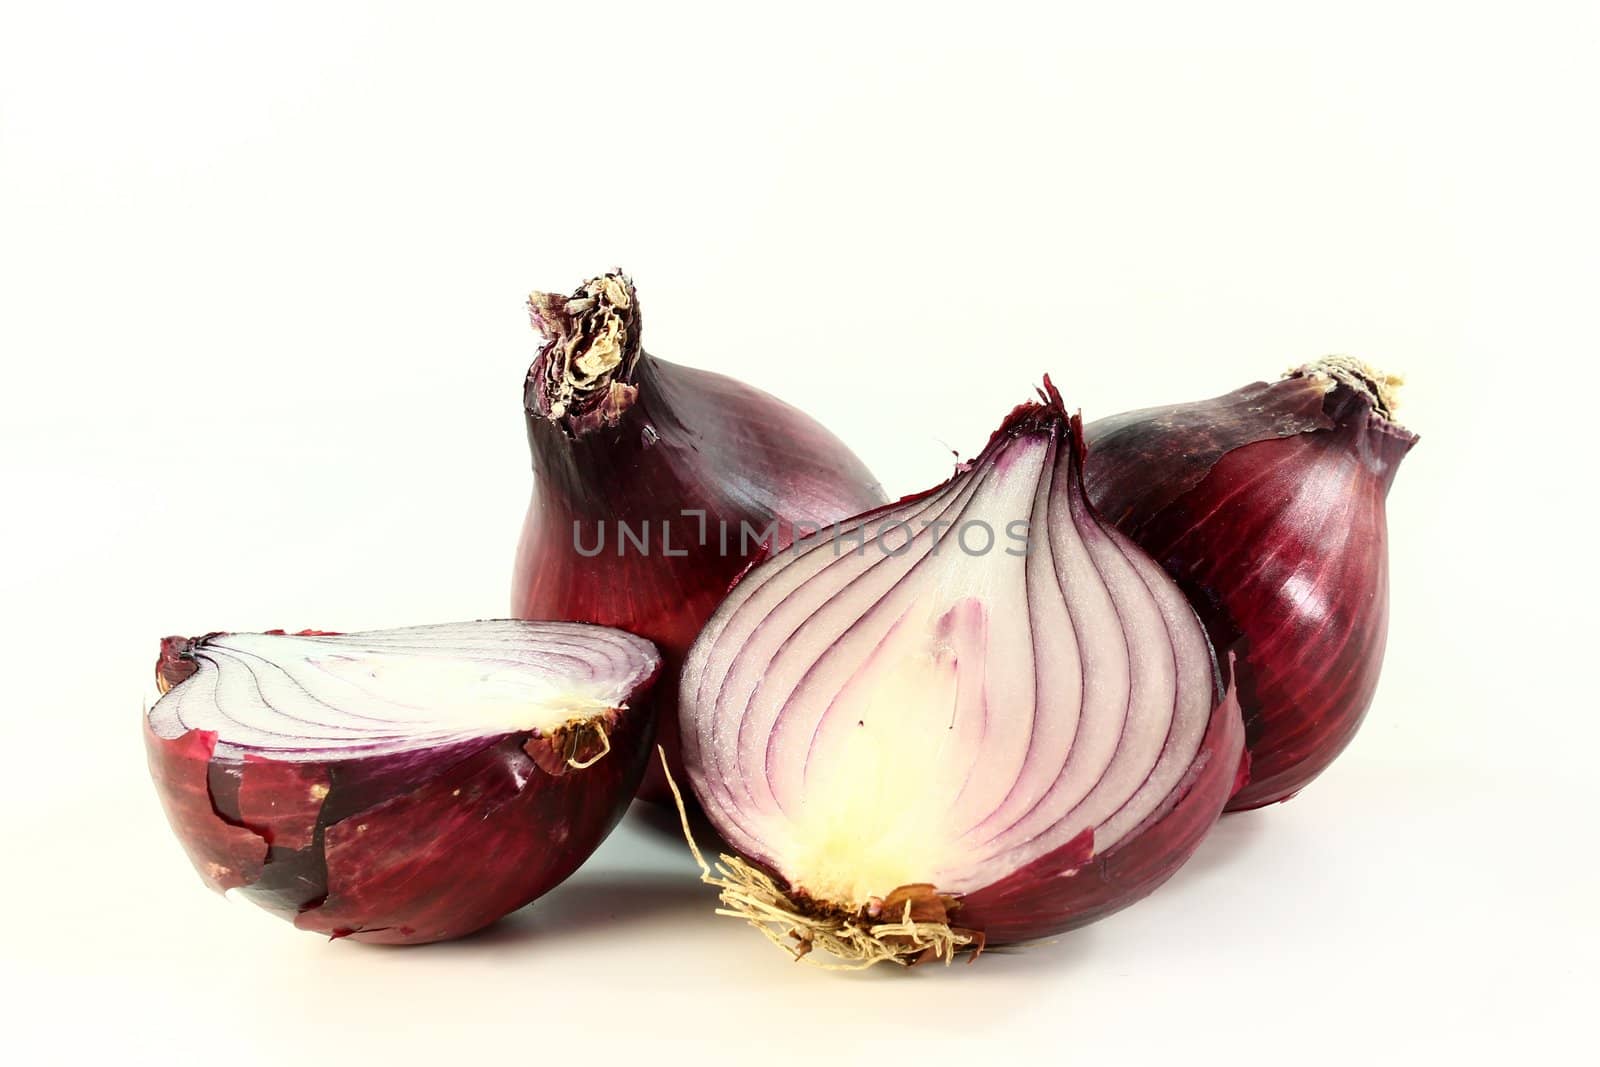 red onions by silencefoto